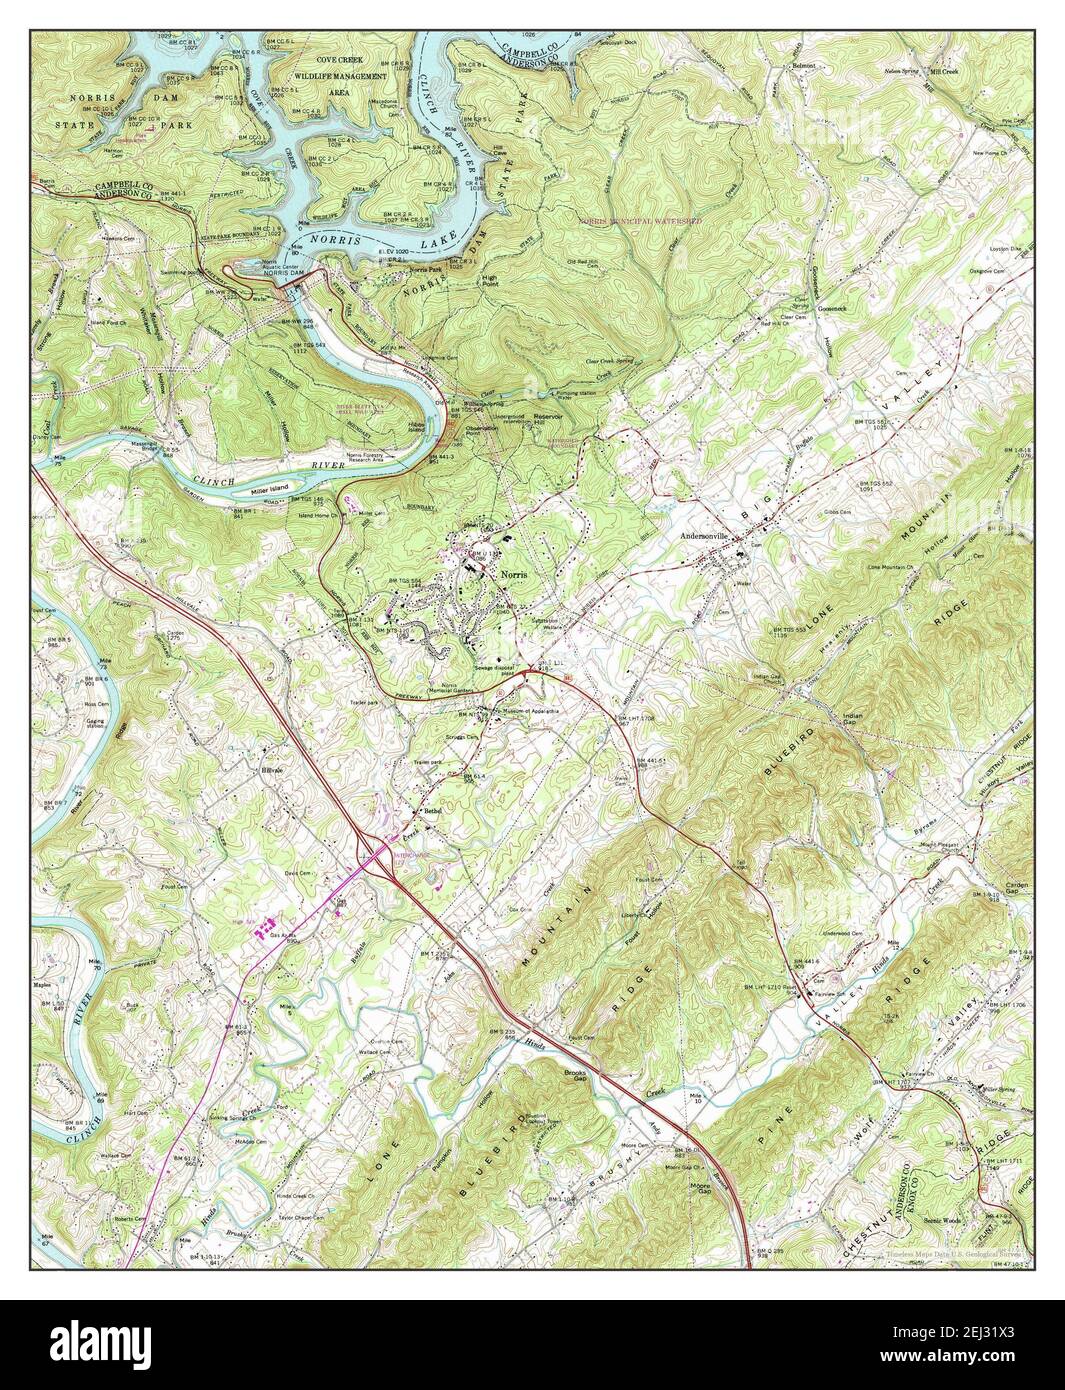 Norris, Tennessee, map 1973, 1:24000, United States of America by Timeless Maps, data U.S. Geological Survey Stock Photo